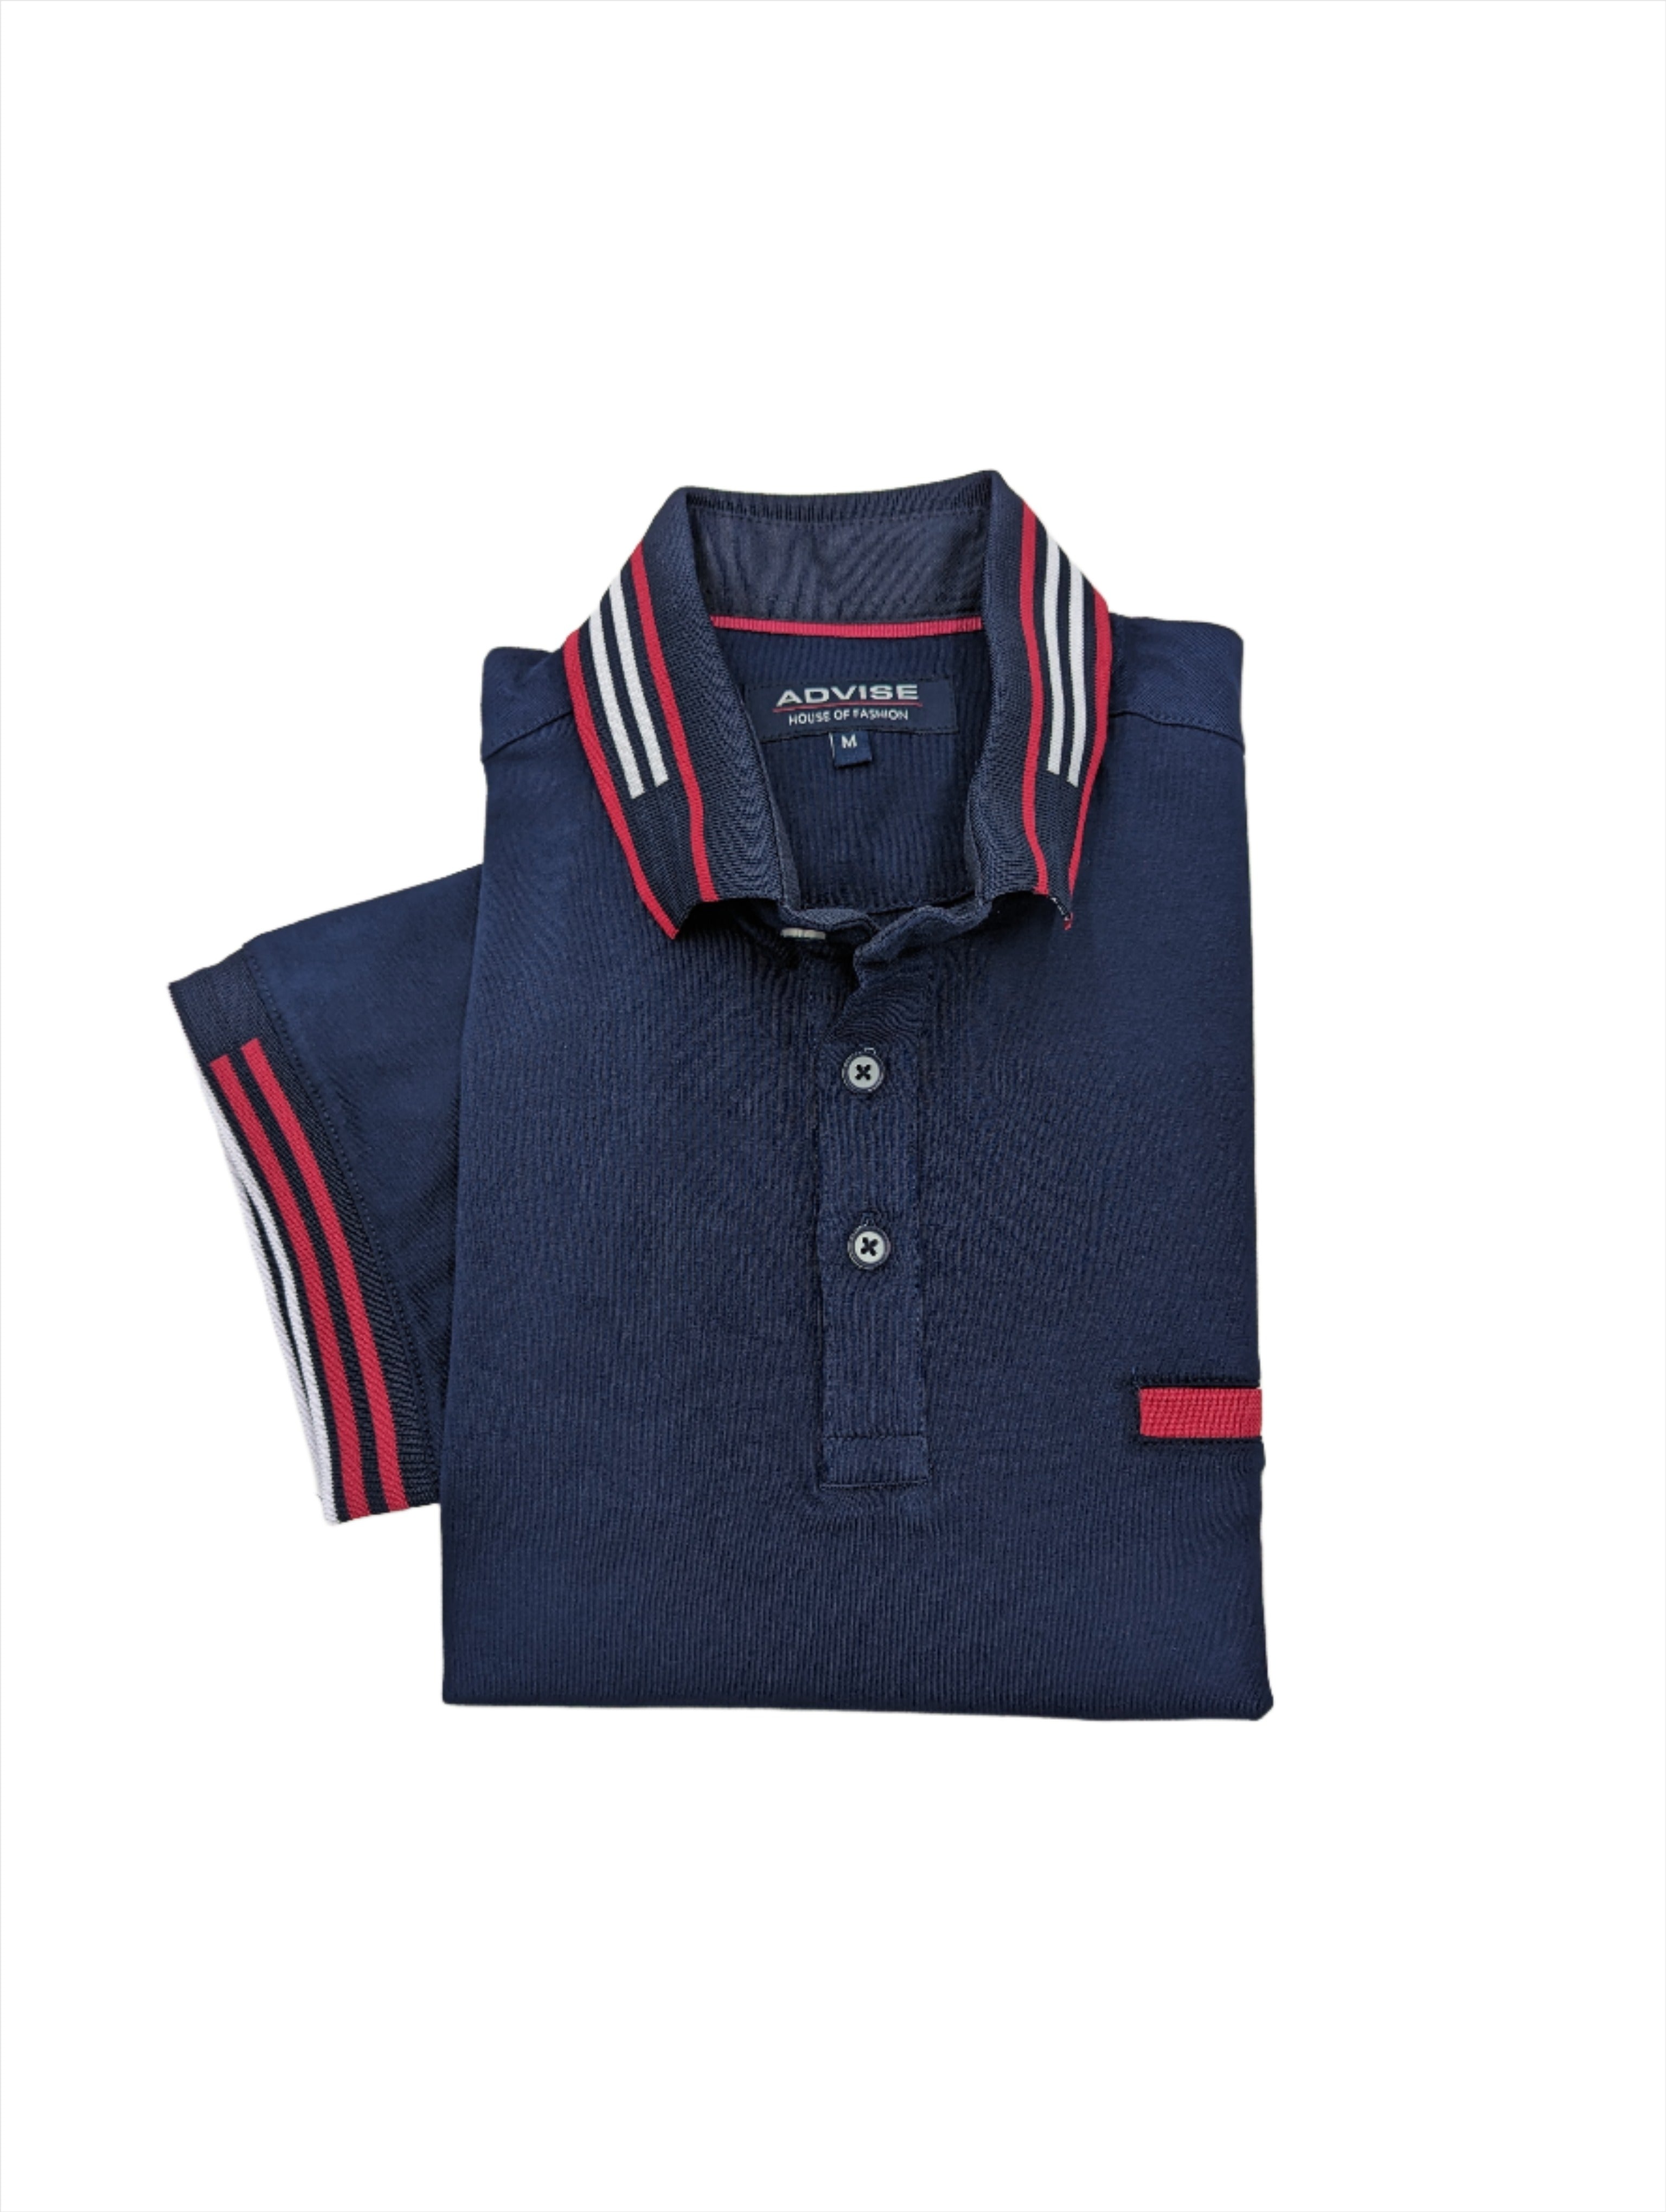 Advise  Navy Polo Shirt with red & white tipping-Sleeve detail